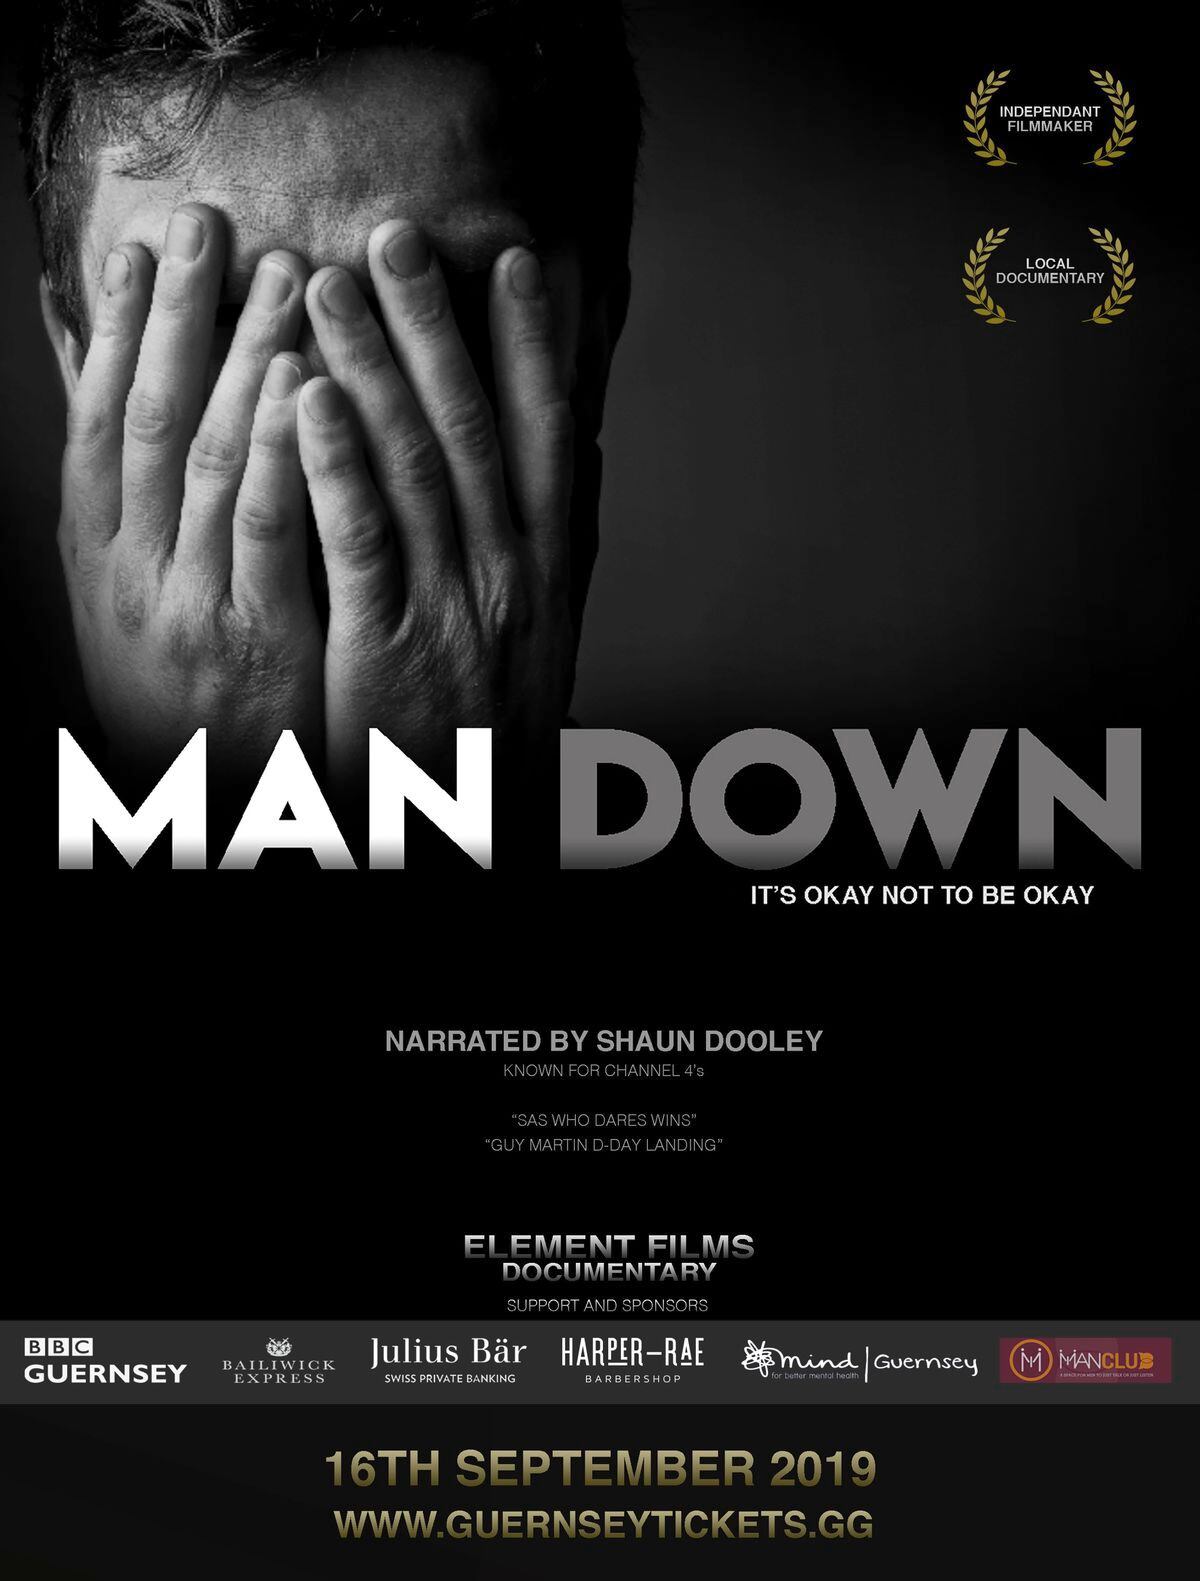 Man Down, which premieres on 16 September, was made by Gaz Papworth in his spare time.